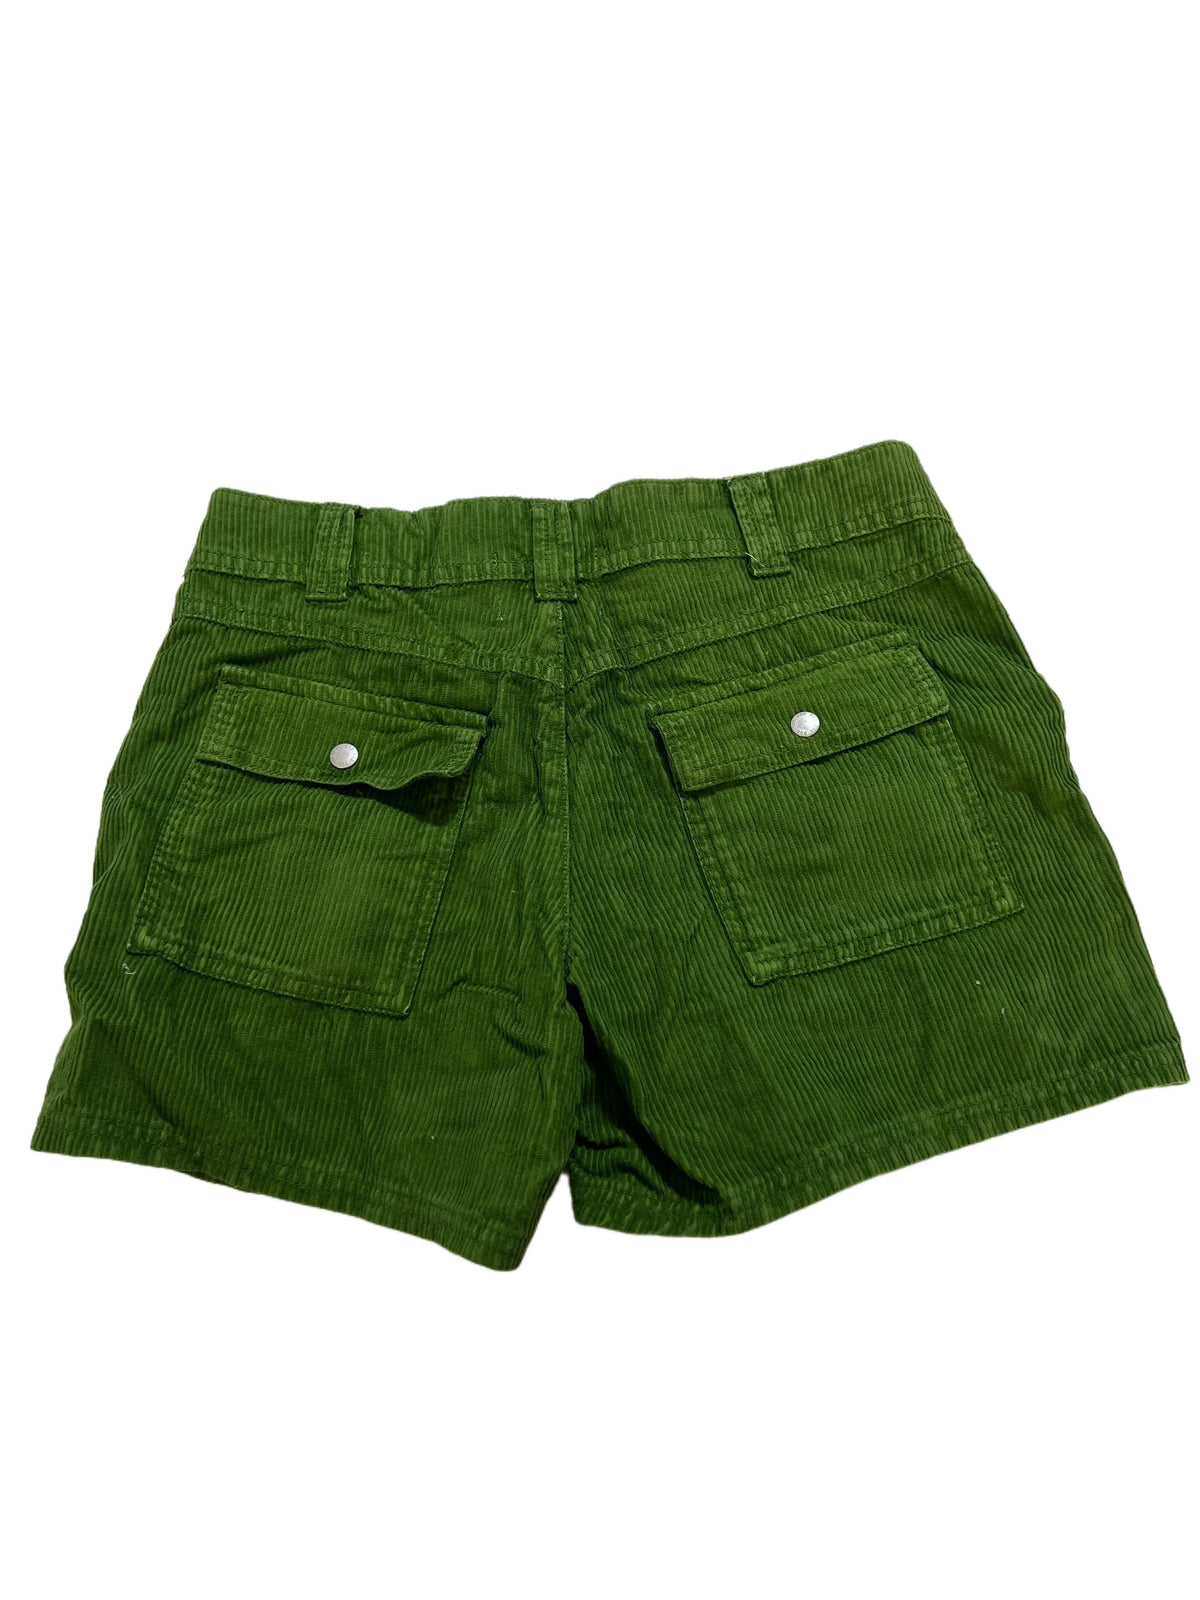 BDG- Green Corduroy Shorts New With Tags!